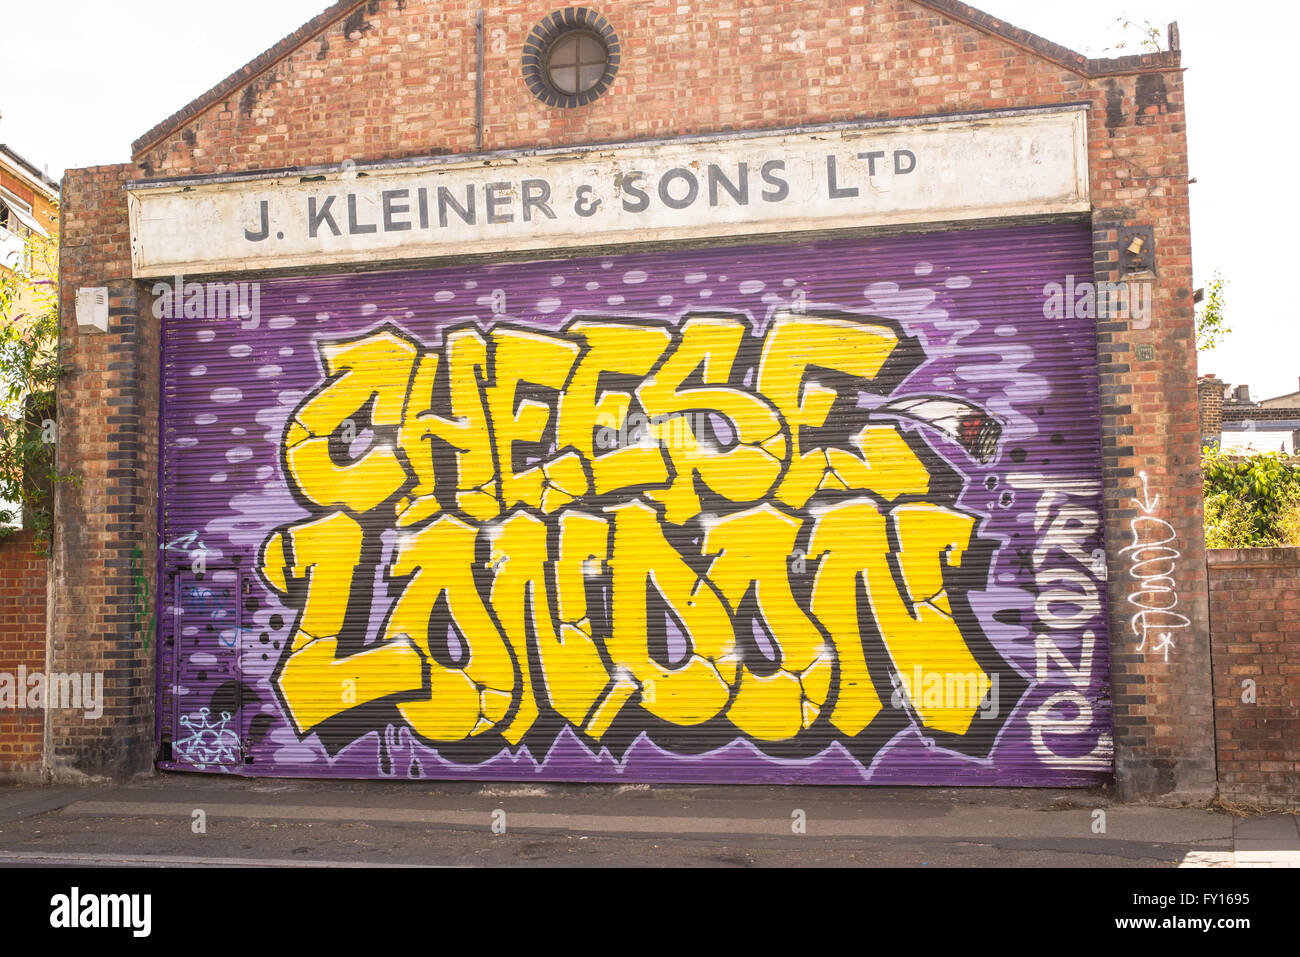 Street art mural on the garage door of an old brick building with 'Cheese London' in bright yellow letters Stock Photo